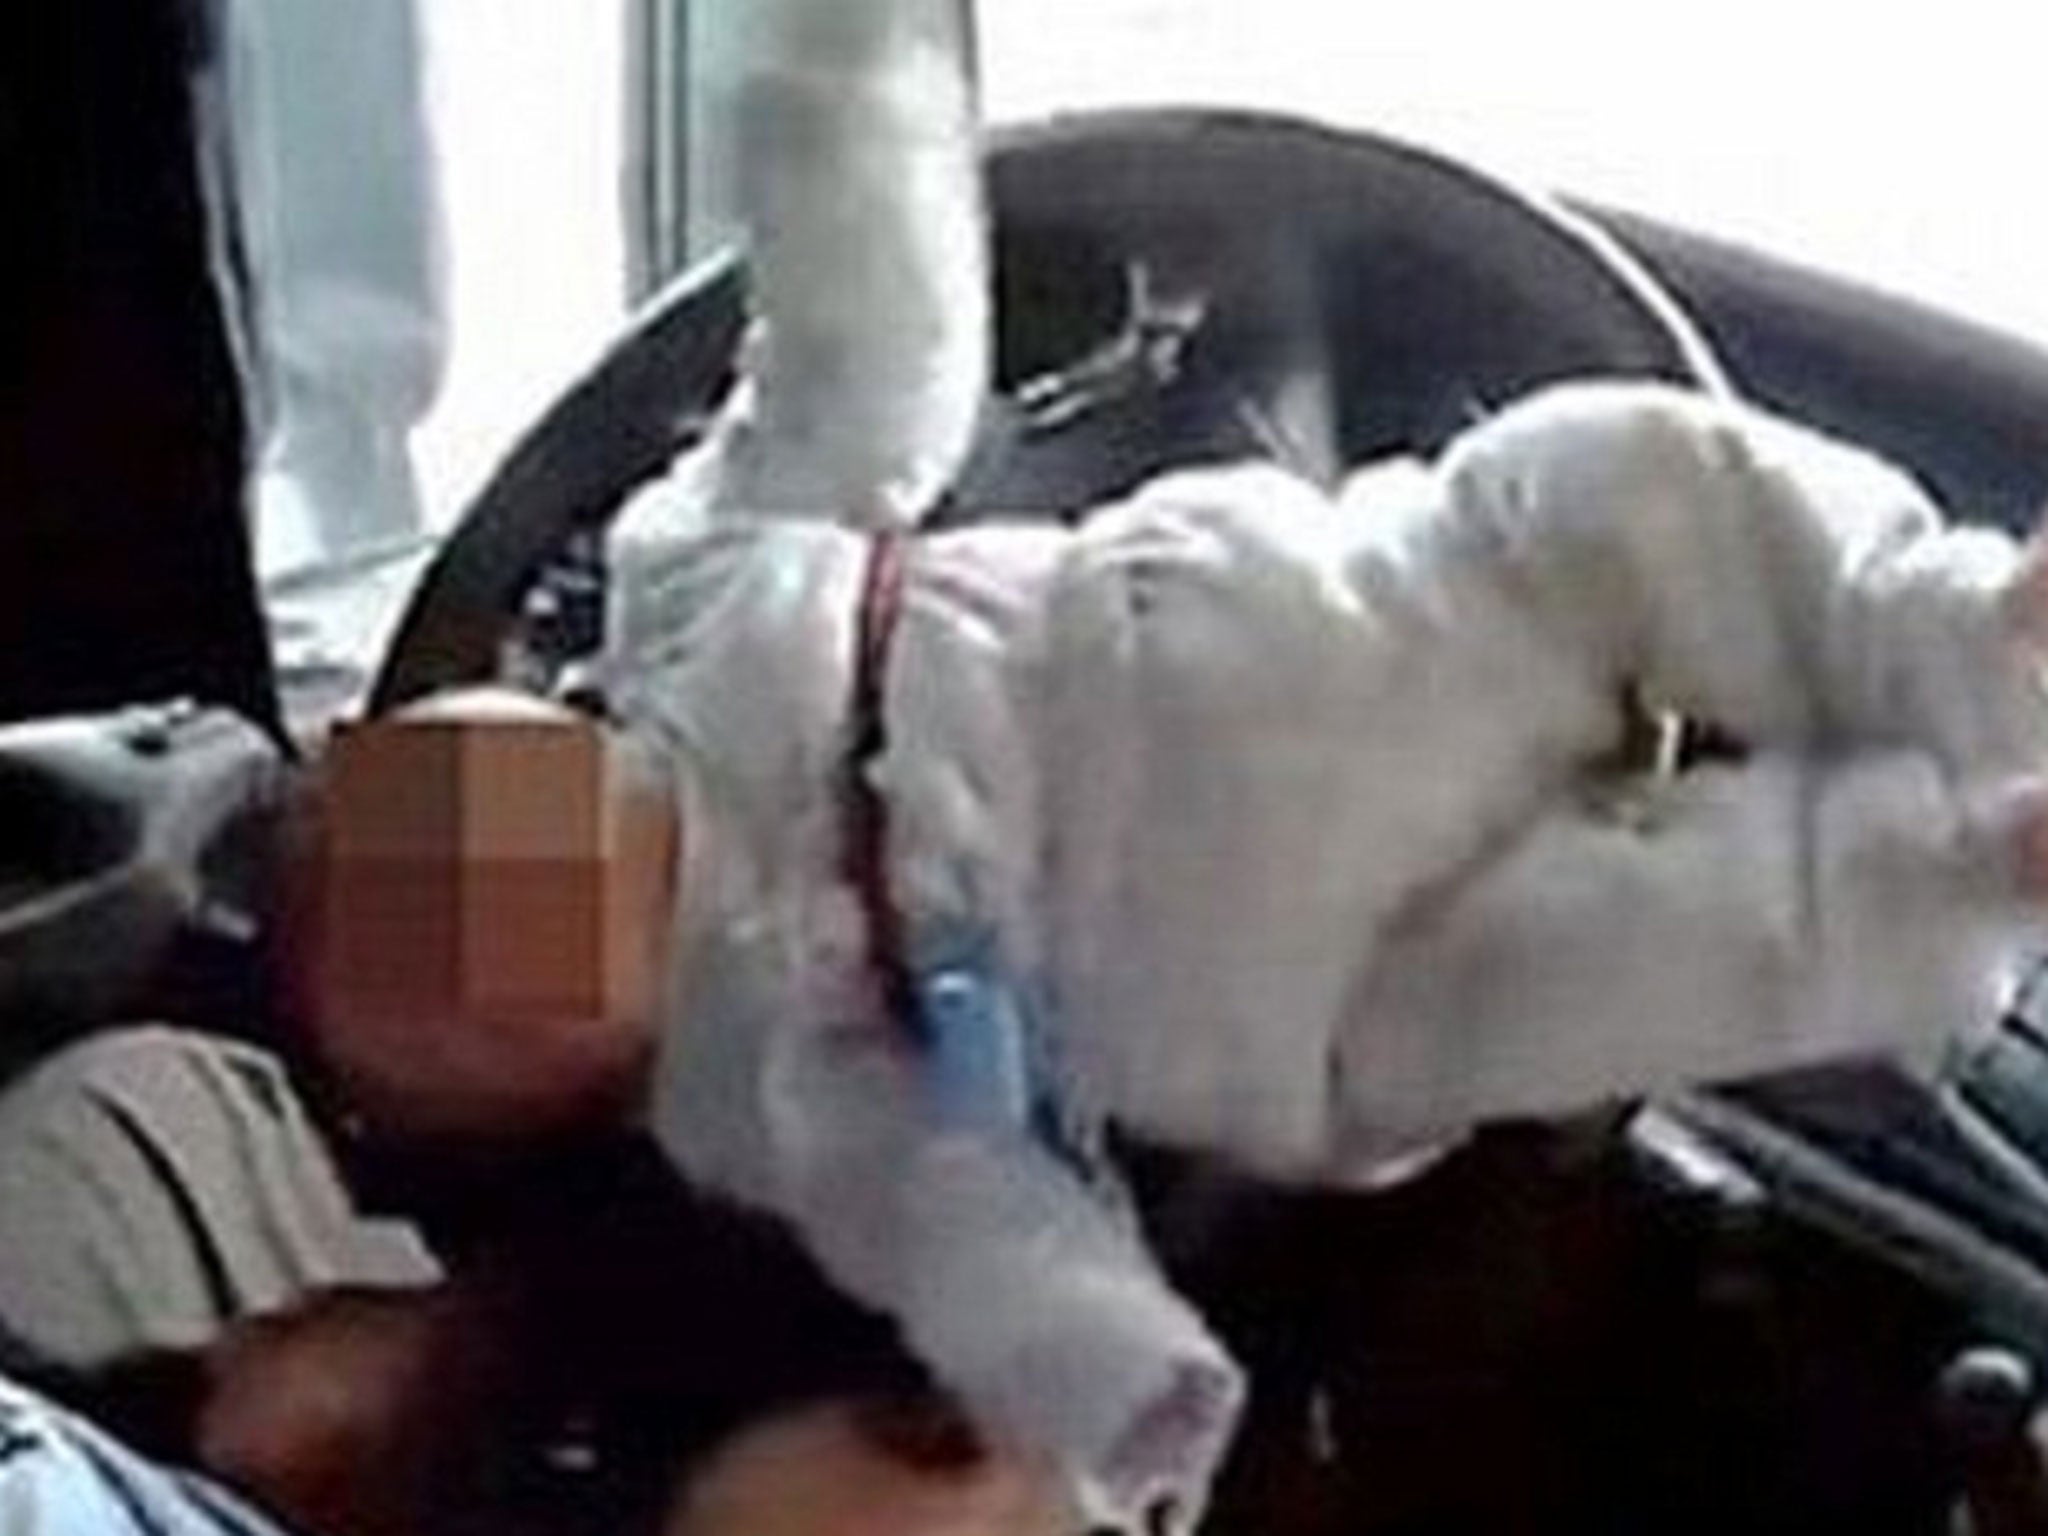 The baby was strapped to the steering wheel as the dad pretended to drive